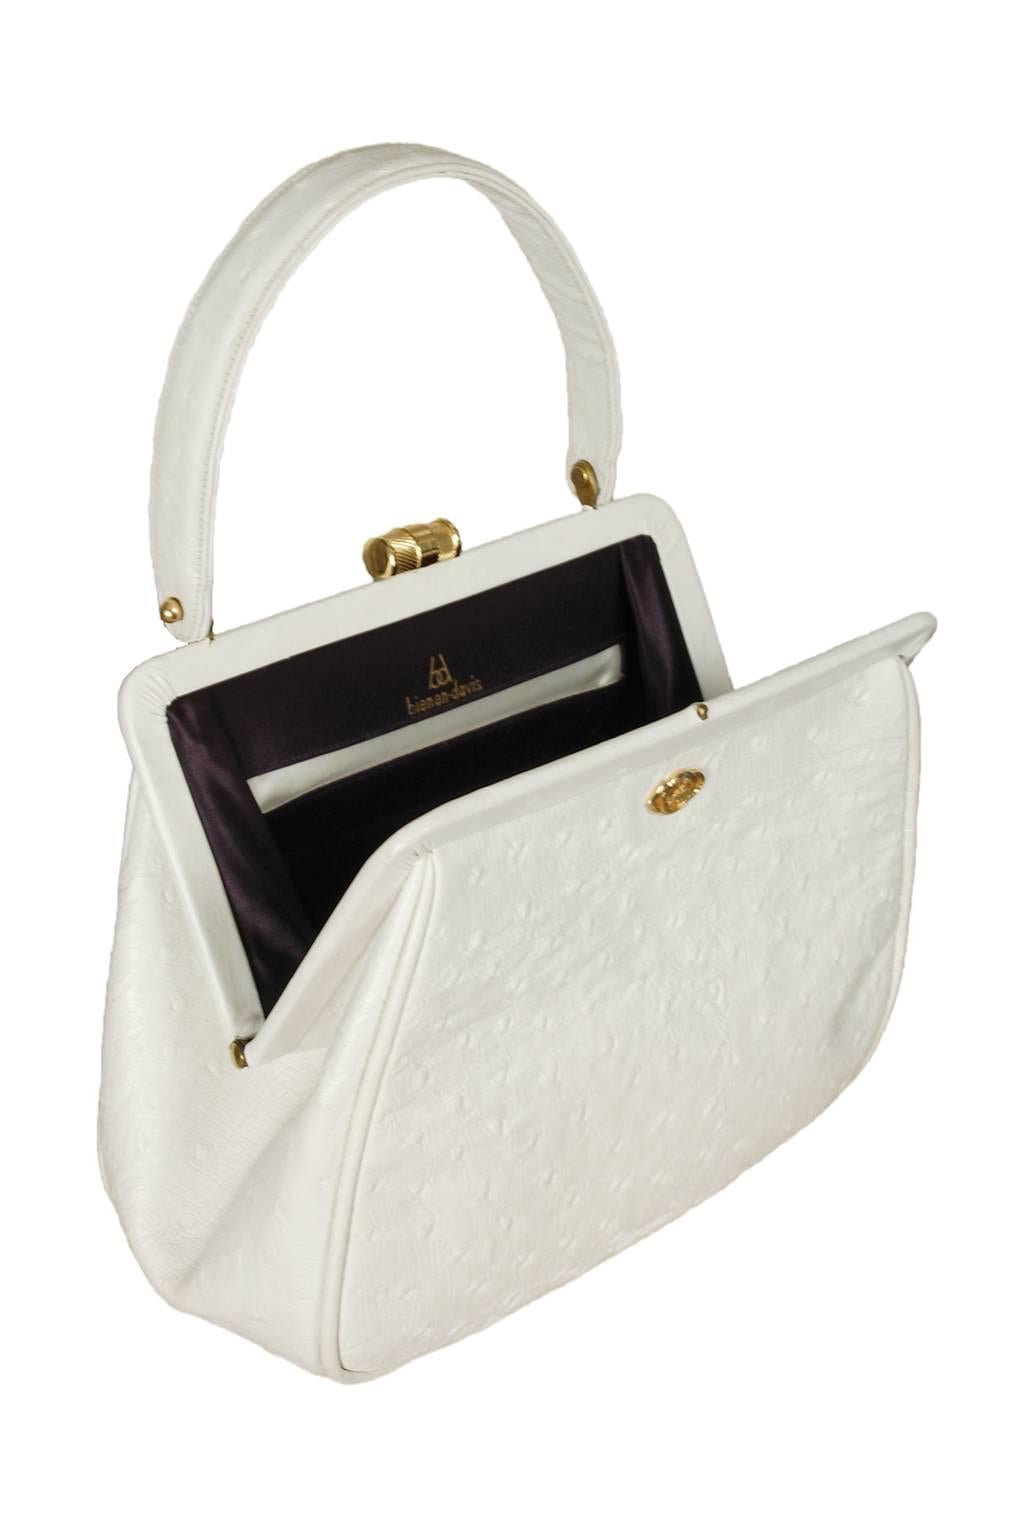 Like the bird itself, ostrich skin is tough and lends itself well to crisply-structured handbags. This one--with its ultra-bright white color, geometric shape and rigid top handle--could not be more perfectly suited to its material, as it maintains